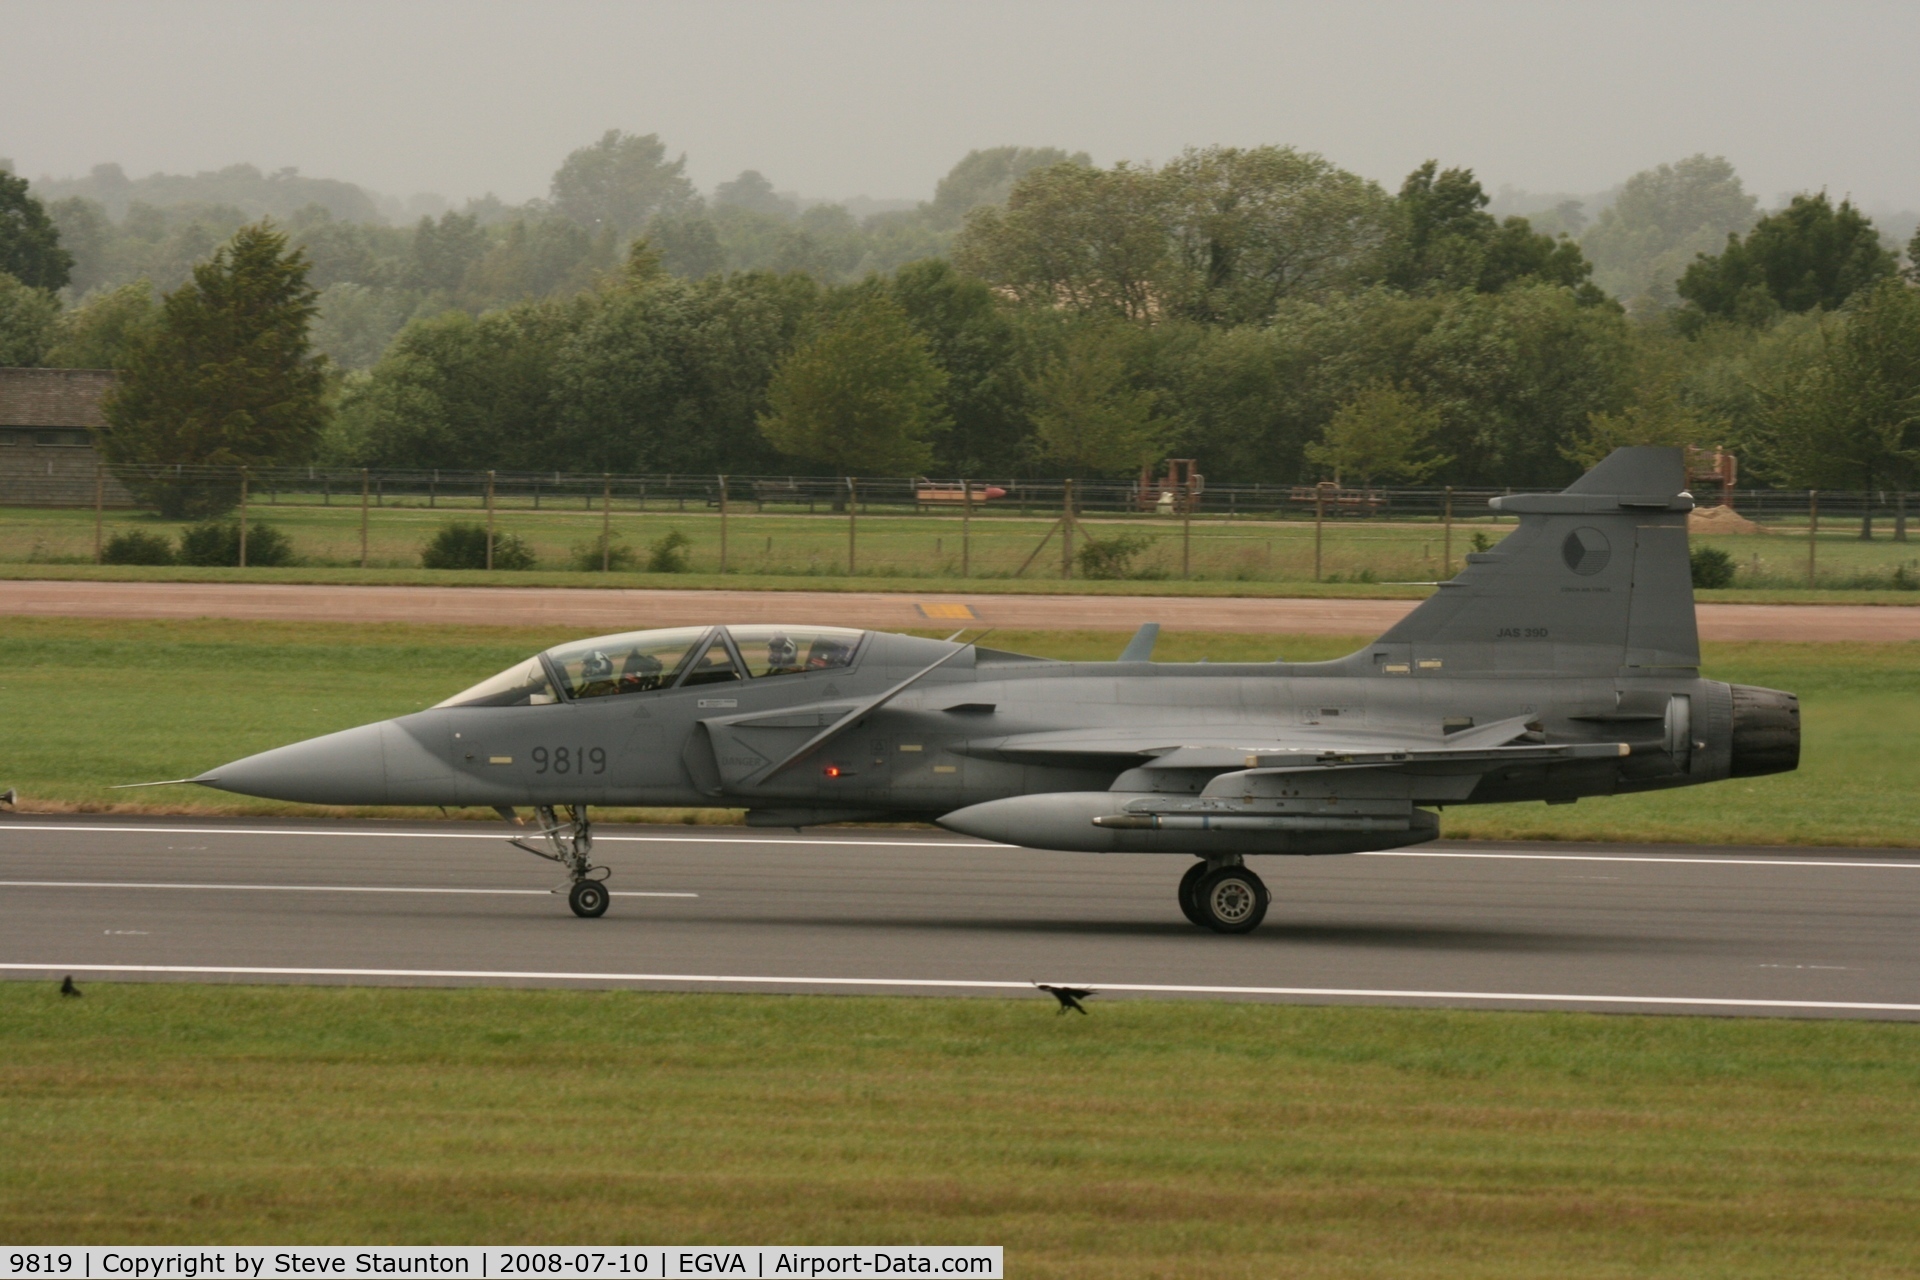 9819, Saab JAS-39D Gripen C/N 39819, Taken at the Royal International Air Tattoo 2008 during arrivals and departures (show days cancelled due to bad weather)